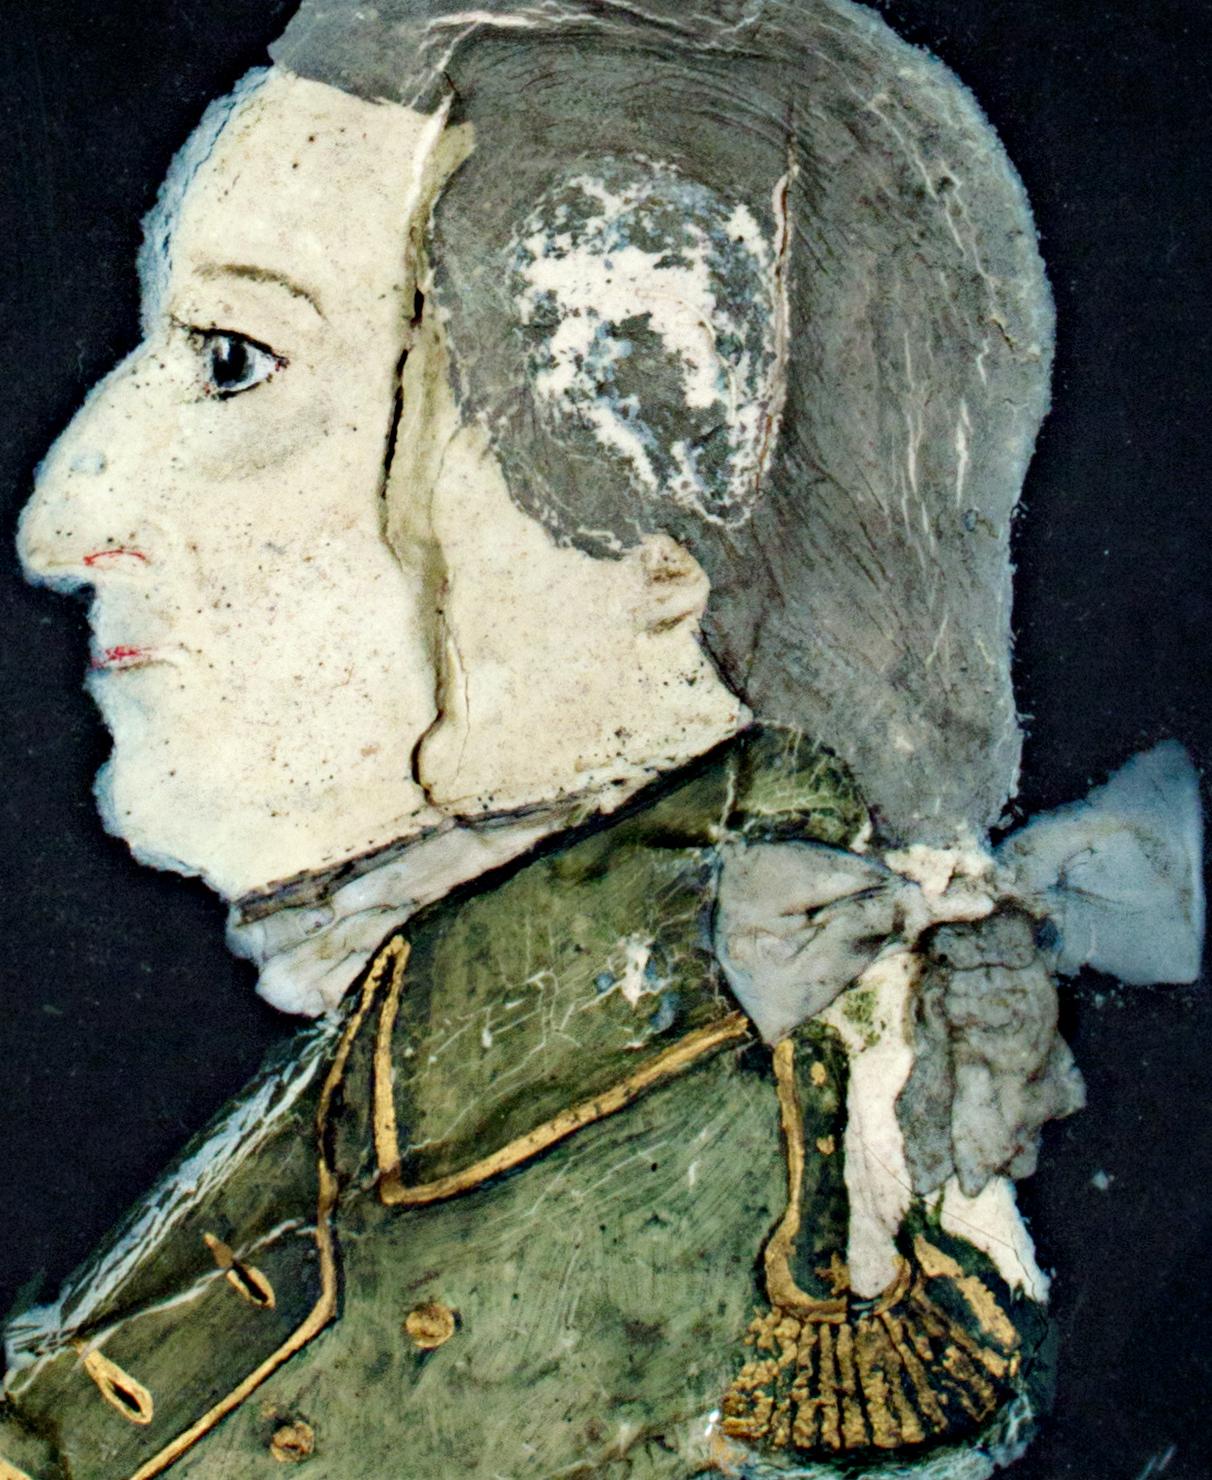 This profile portrait of George Washington is a wax relief in an early antique birdseye maple frame, signed and dated as by George Rouse. Rouse is either the actual name or the alias of a forger creating wax busts of the first American president in